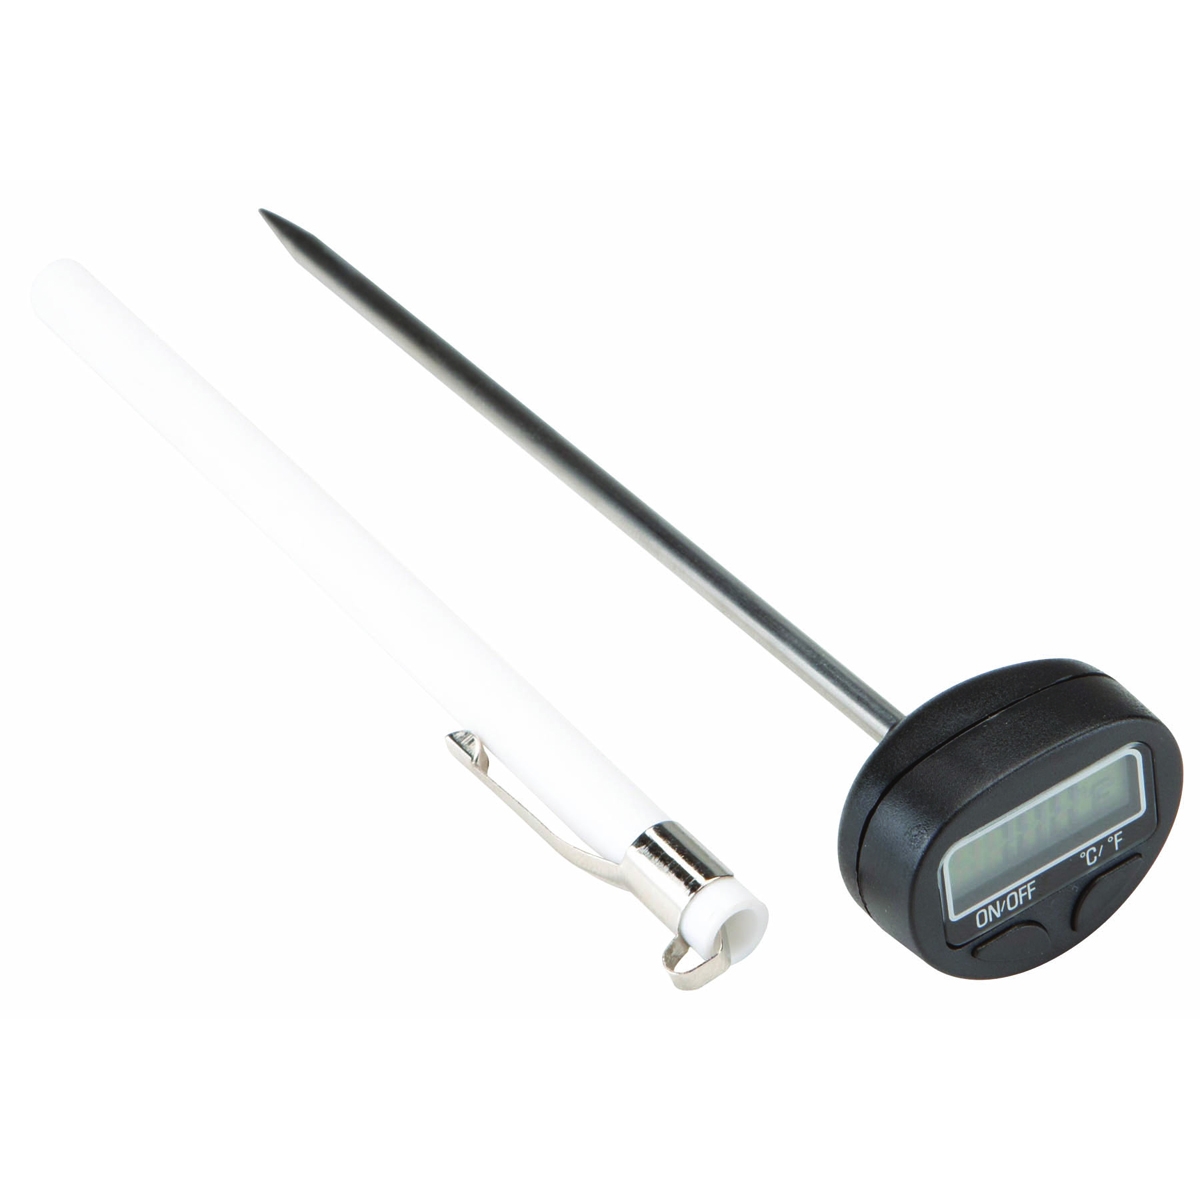 PITTSBURGH Instant Read Digital Thermometer - Item 63614 / 95382